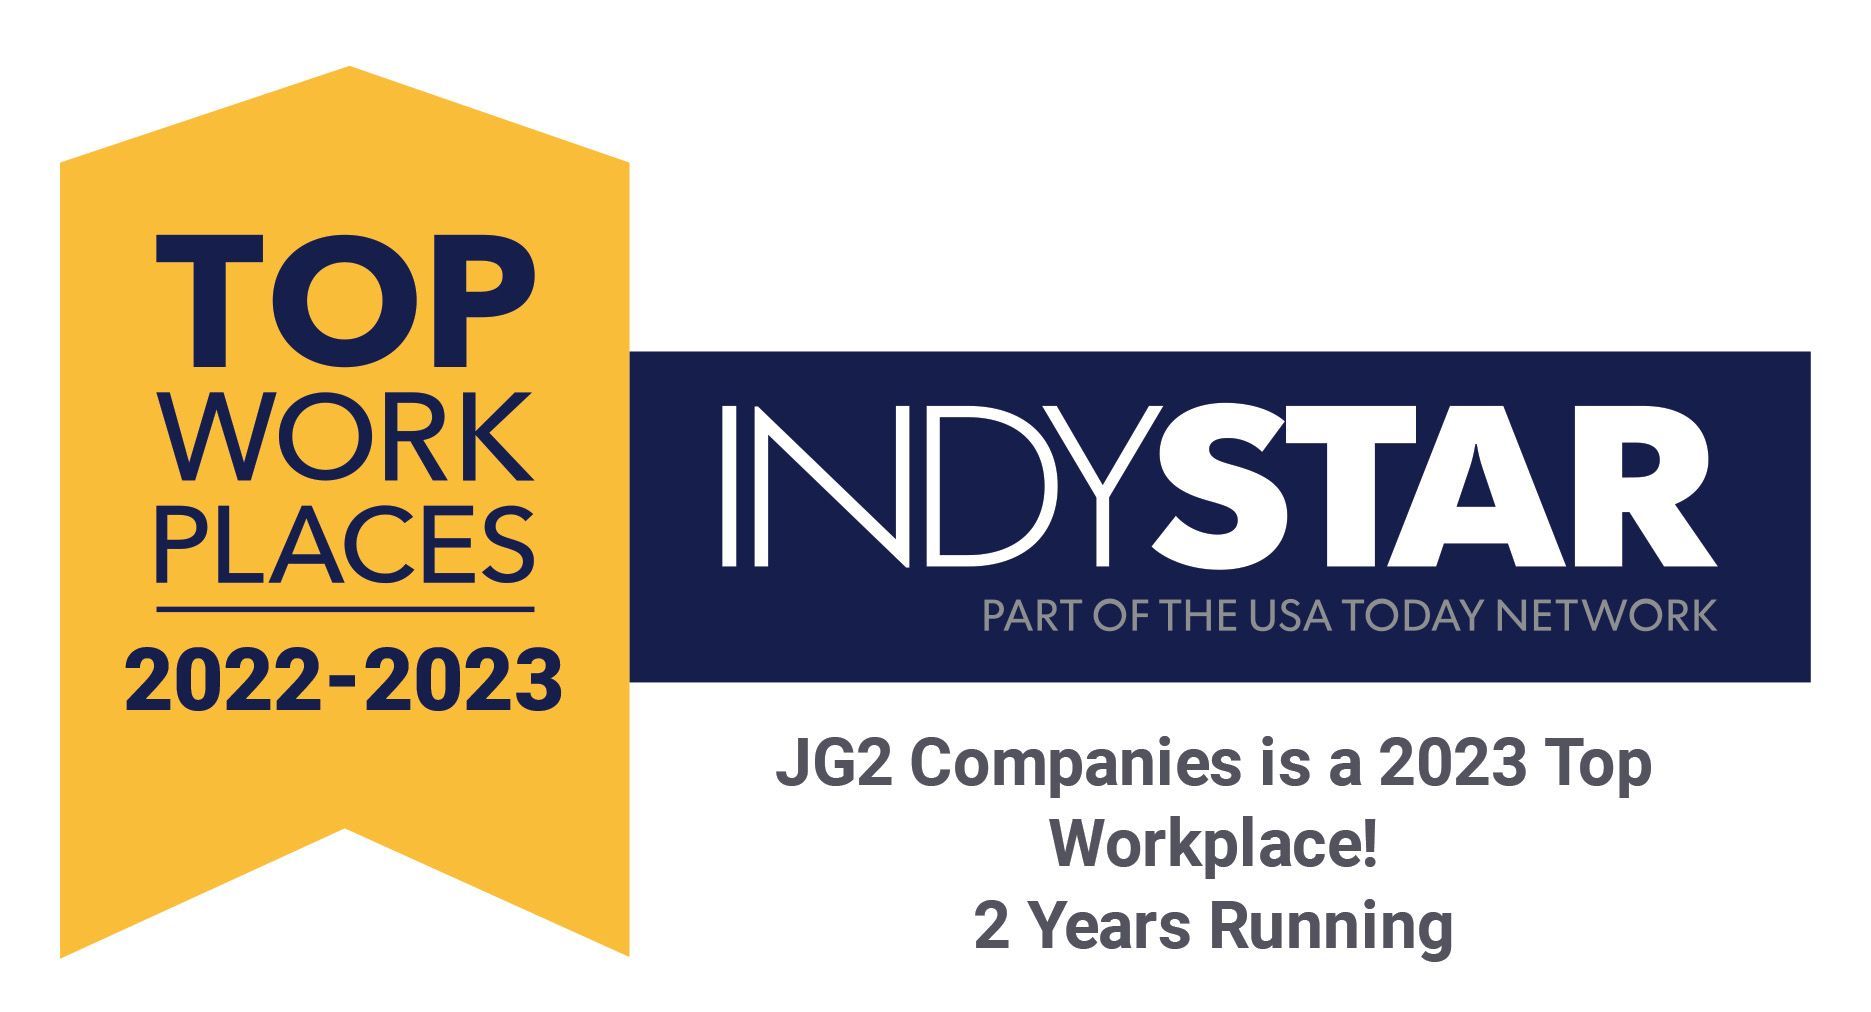 IndySTAR top work places 2022-2023